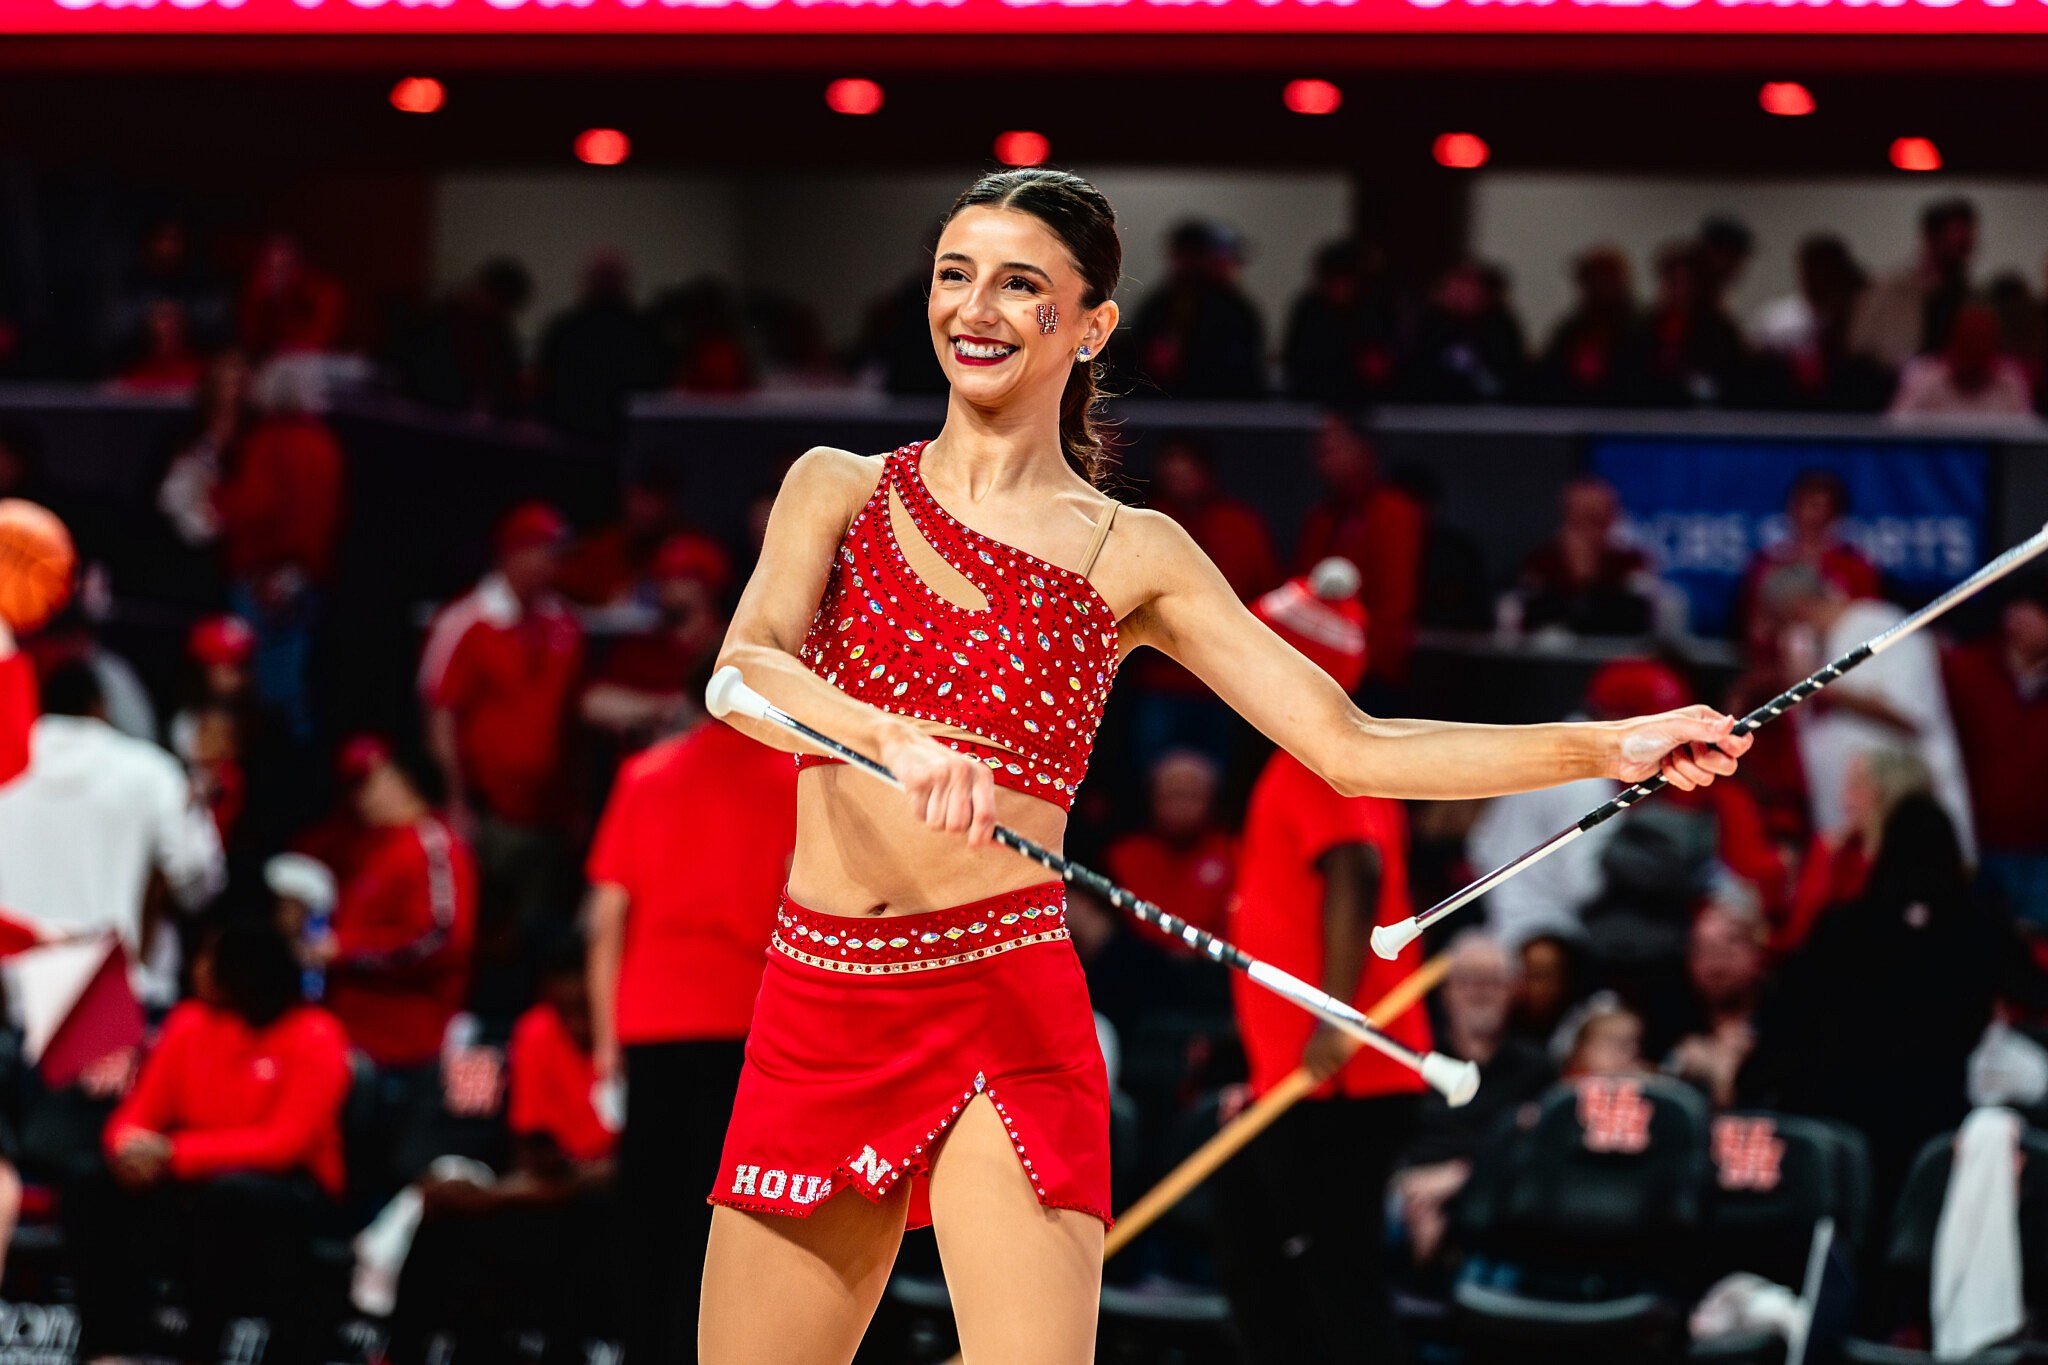 Cougars Get Spun Up With Feature Twirler - Cooglife